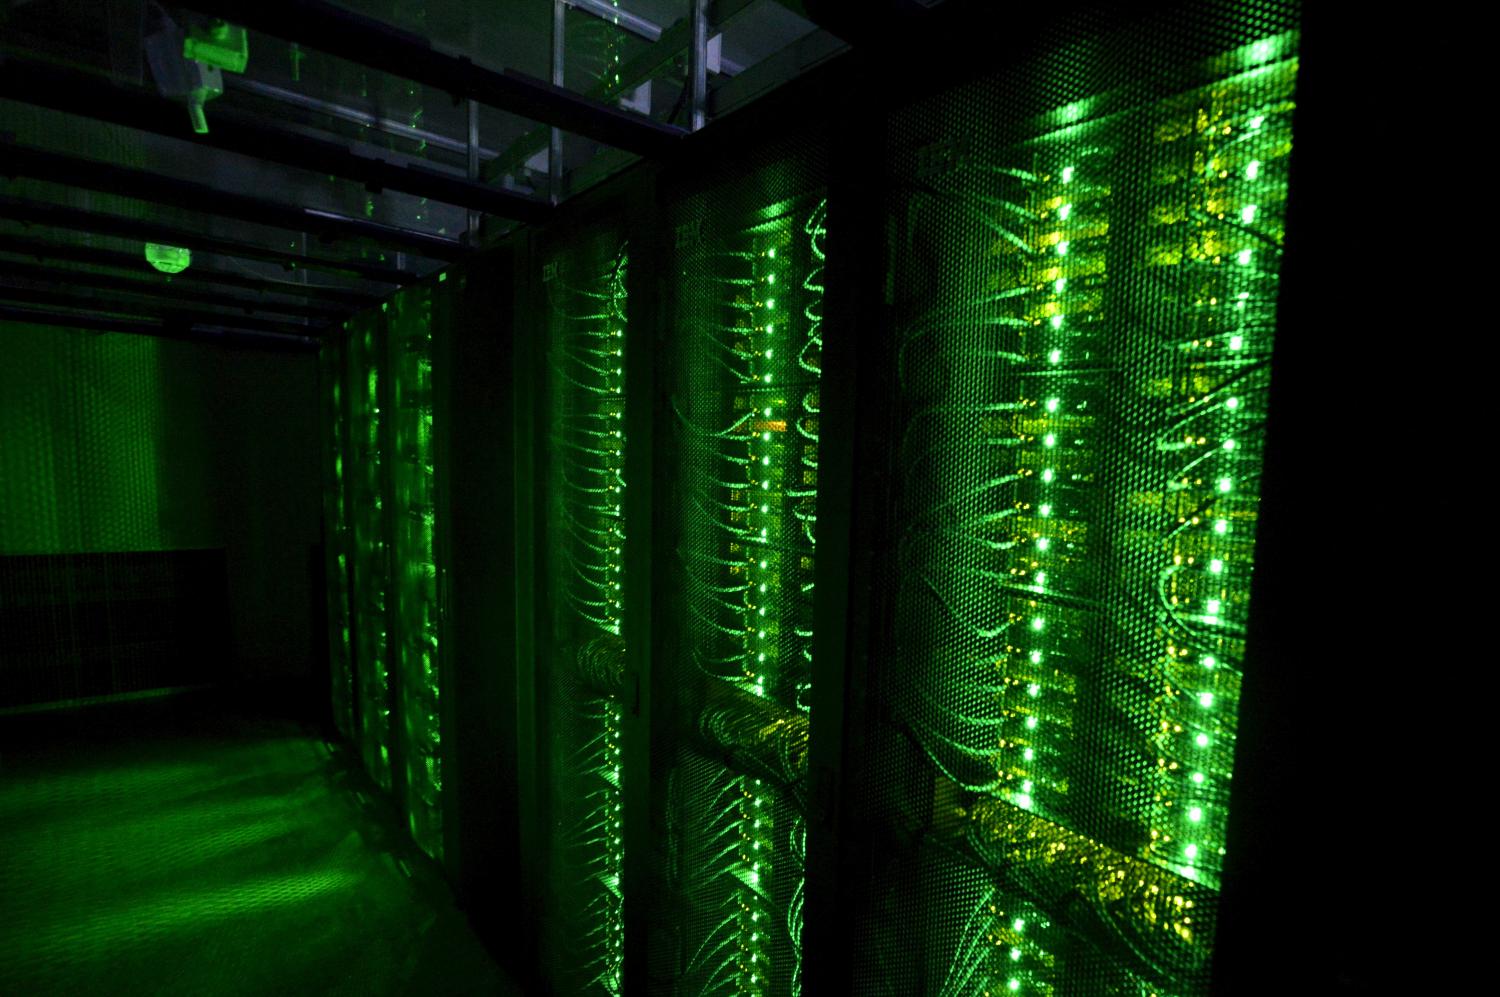 Servers for data storage are seen at Advania's Thor Data Center in Hafnarfjordur, Iceland August 7, 2015. As it emerges from financial isolation, Iceland is trying to make a name for itself again, this time in the business of data centres -- warehouses that consume enormous amounts of energy to store the information of 3.2 billion internet users. Picture taken August 7, 2015. REUTERS/Sigtryggur Ari